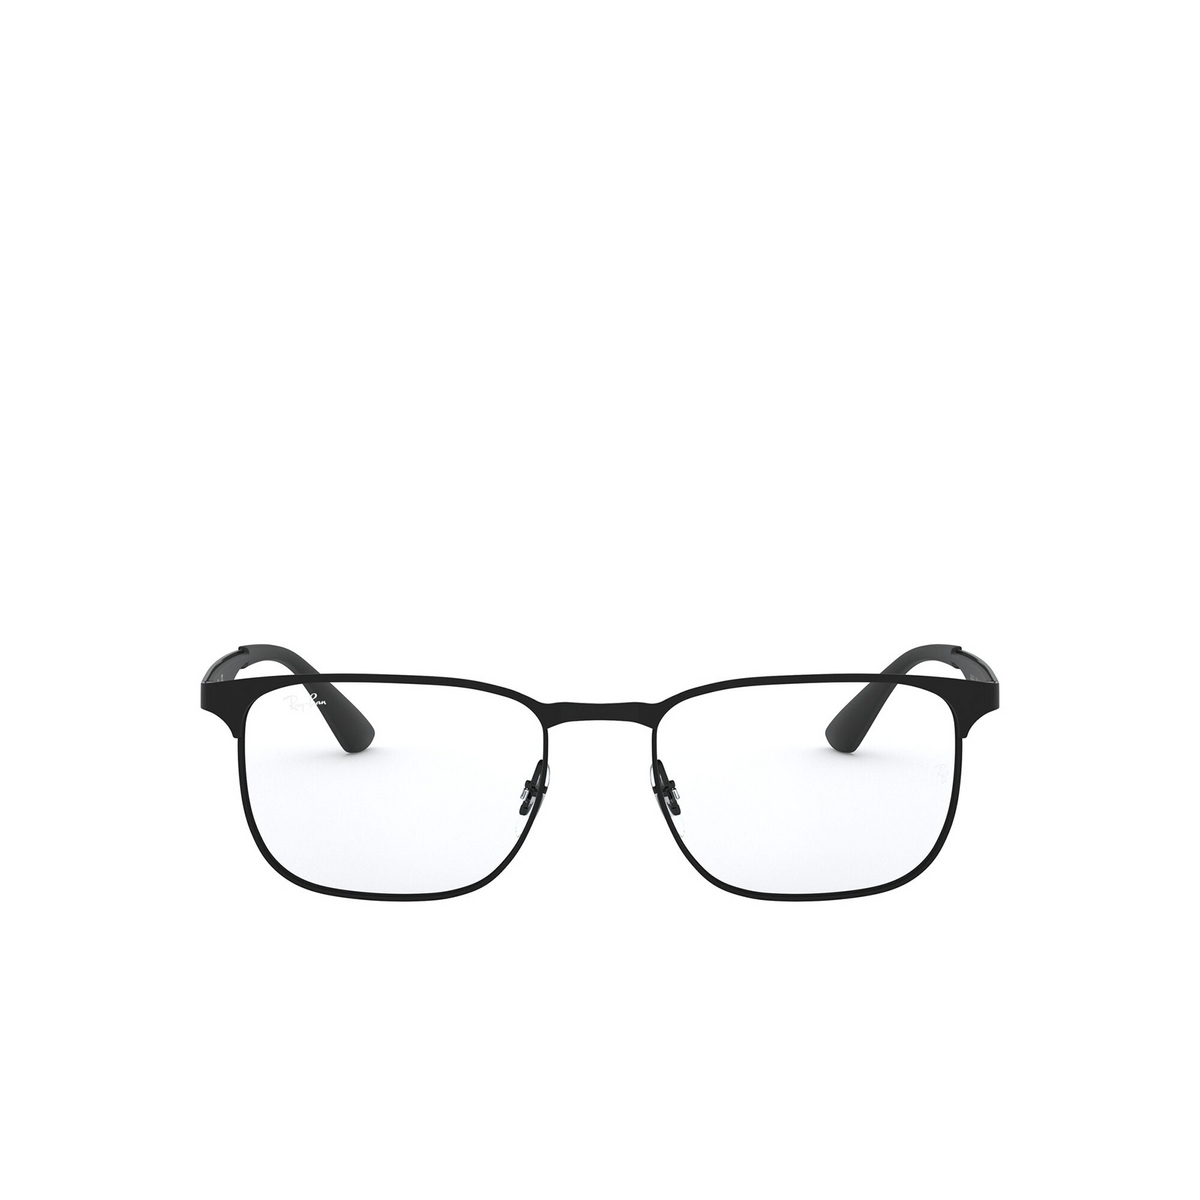 Ray-Ban® Square Eyeglasses: RX6363 color Matte Black On Black 2904 - front view.